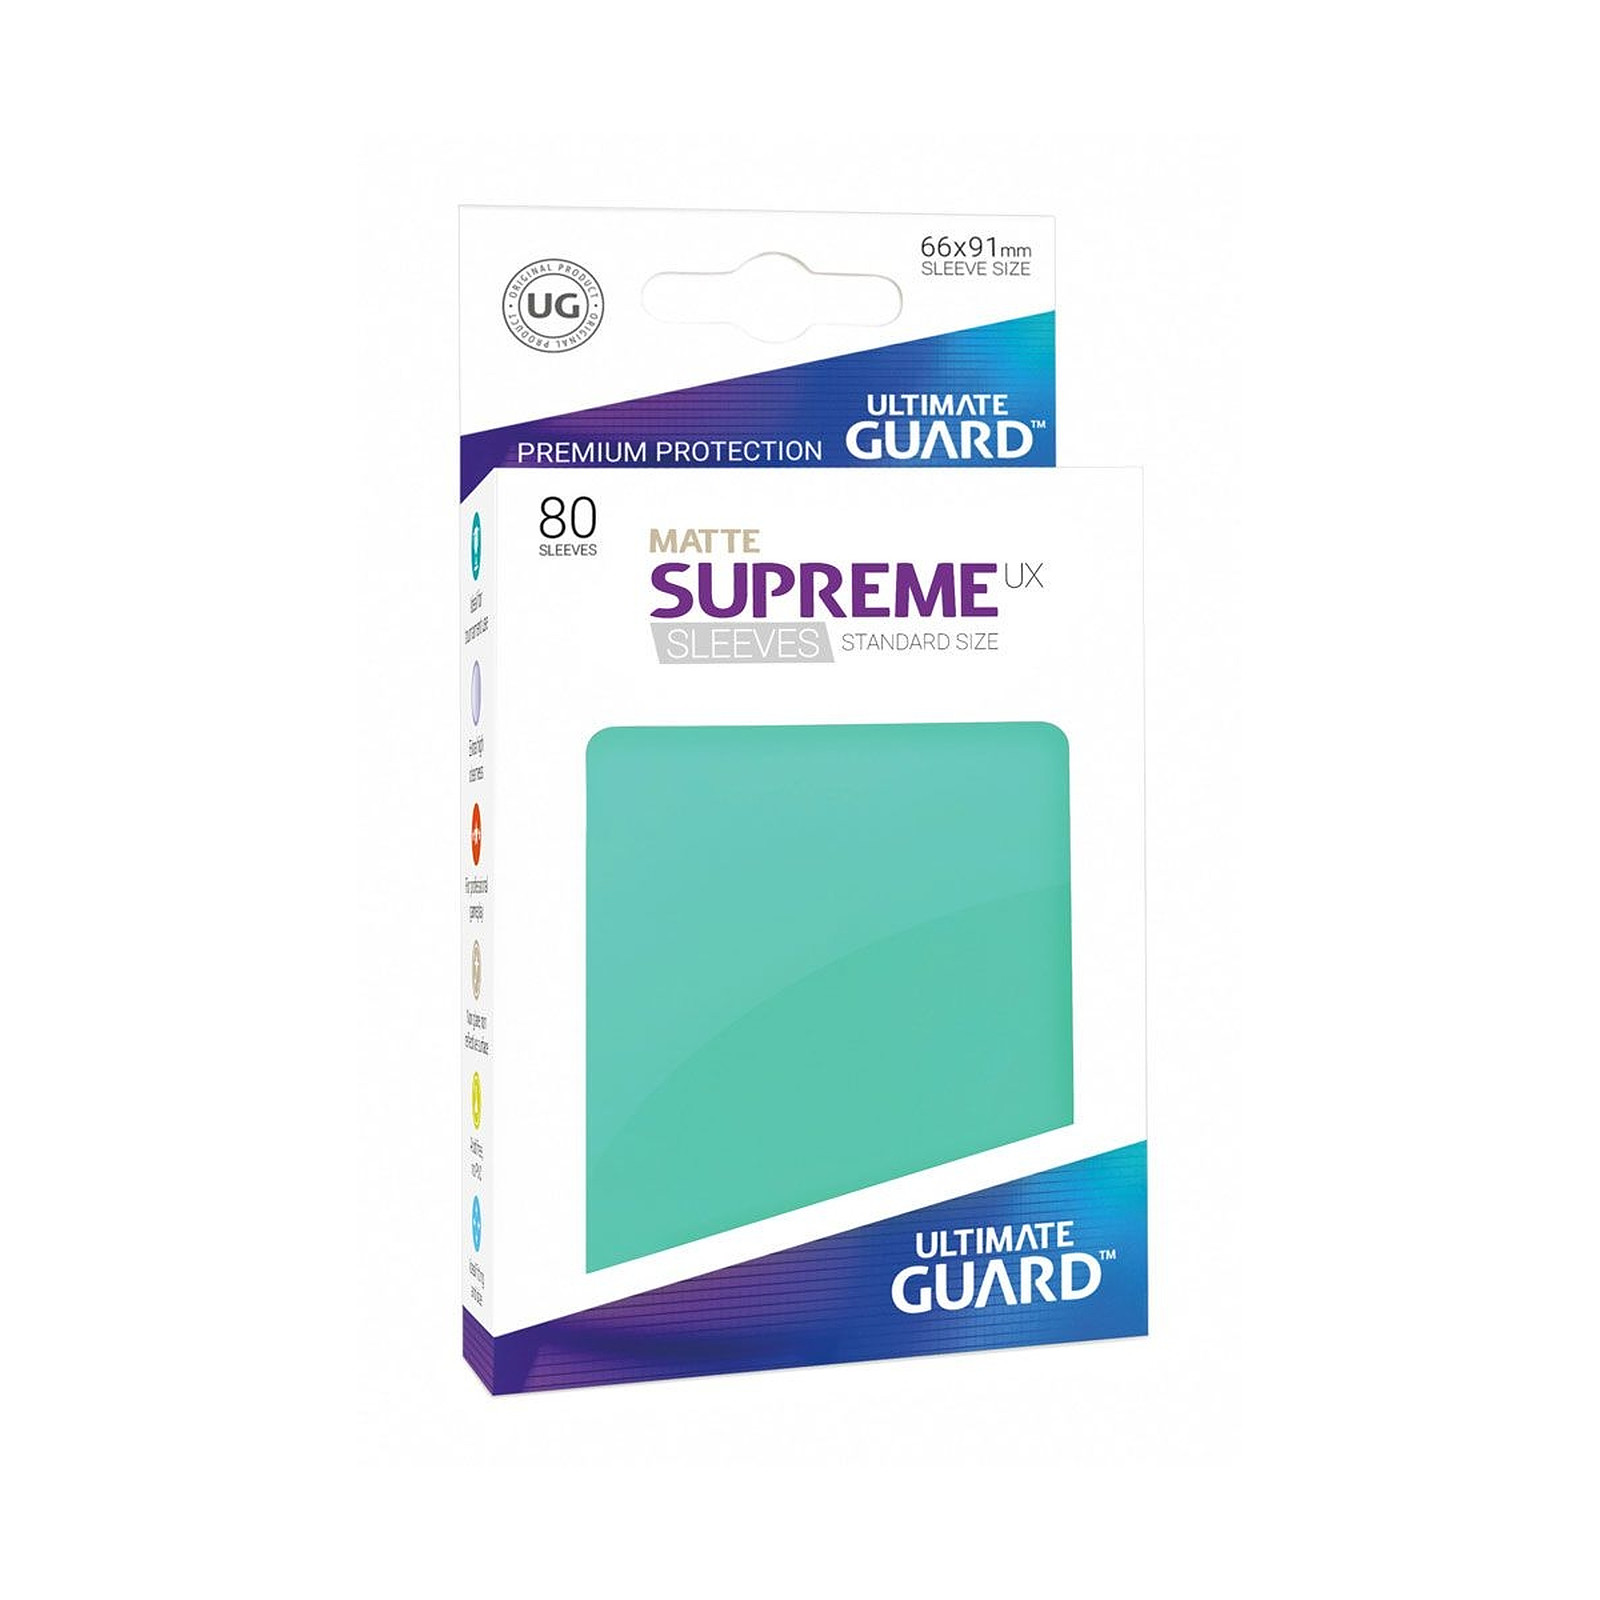 Ultimate Guard - 80 pochettes Supreme UX Sleeves taille standard Turquoise Mat - Accessoire jeux Ultimate Guard